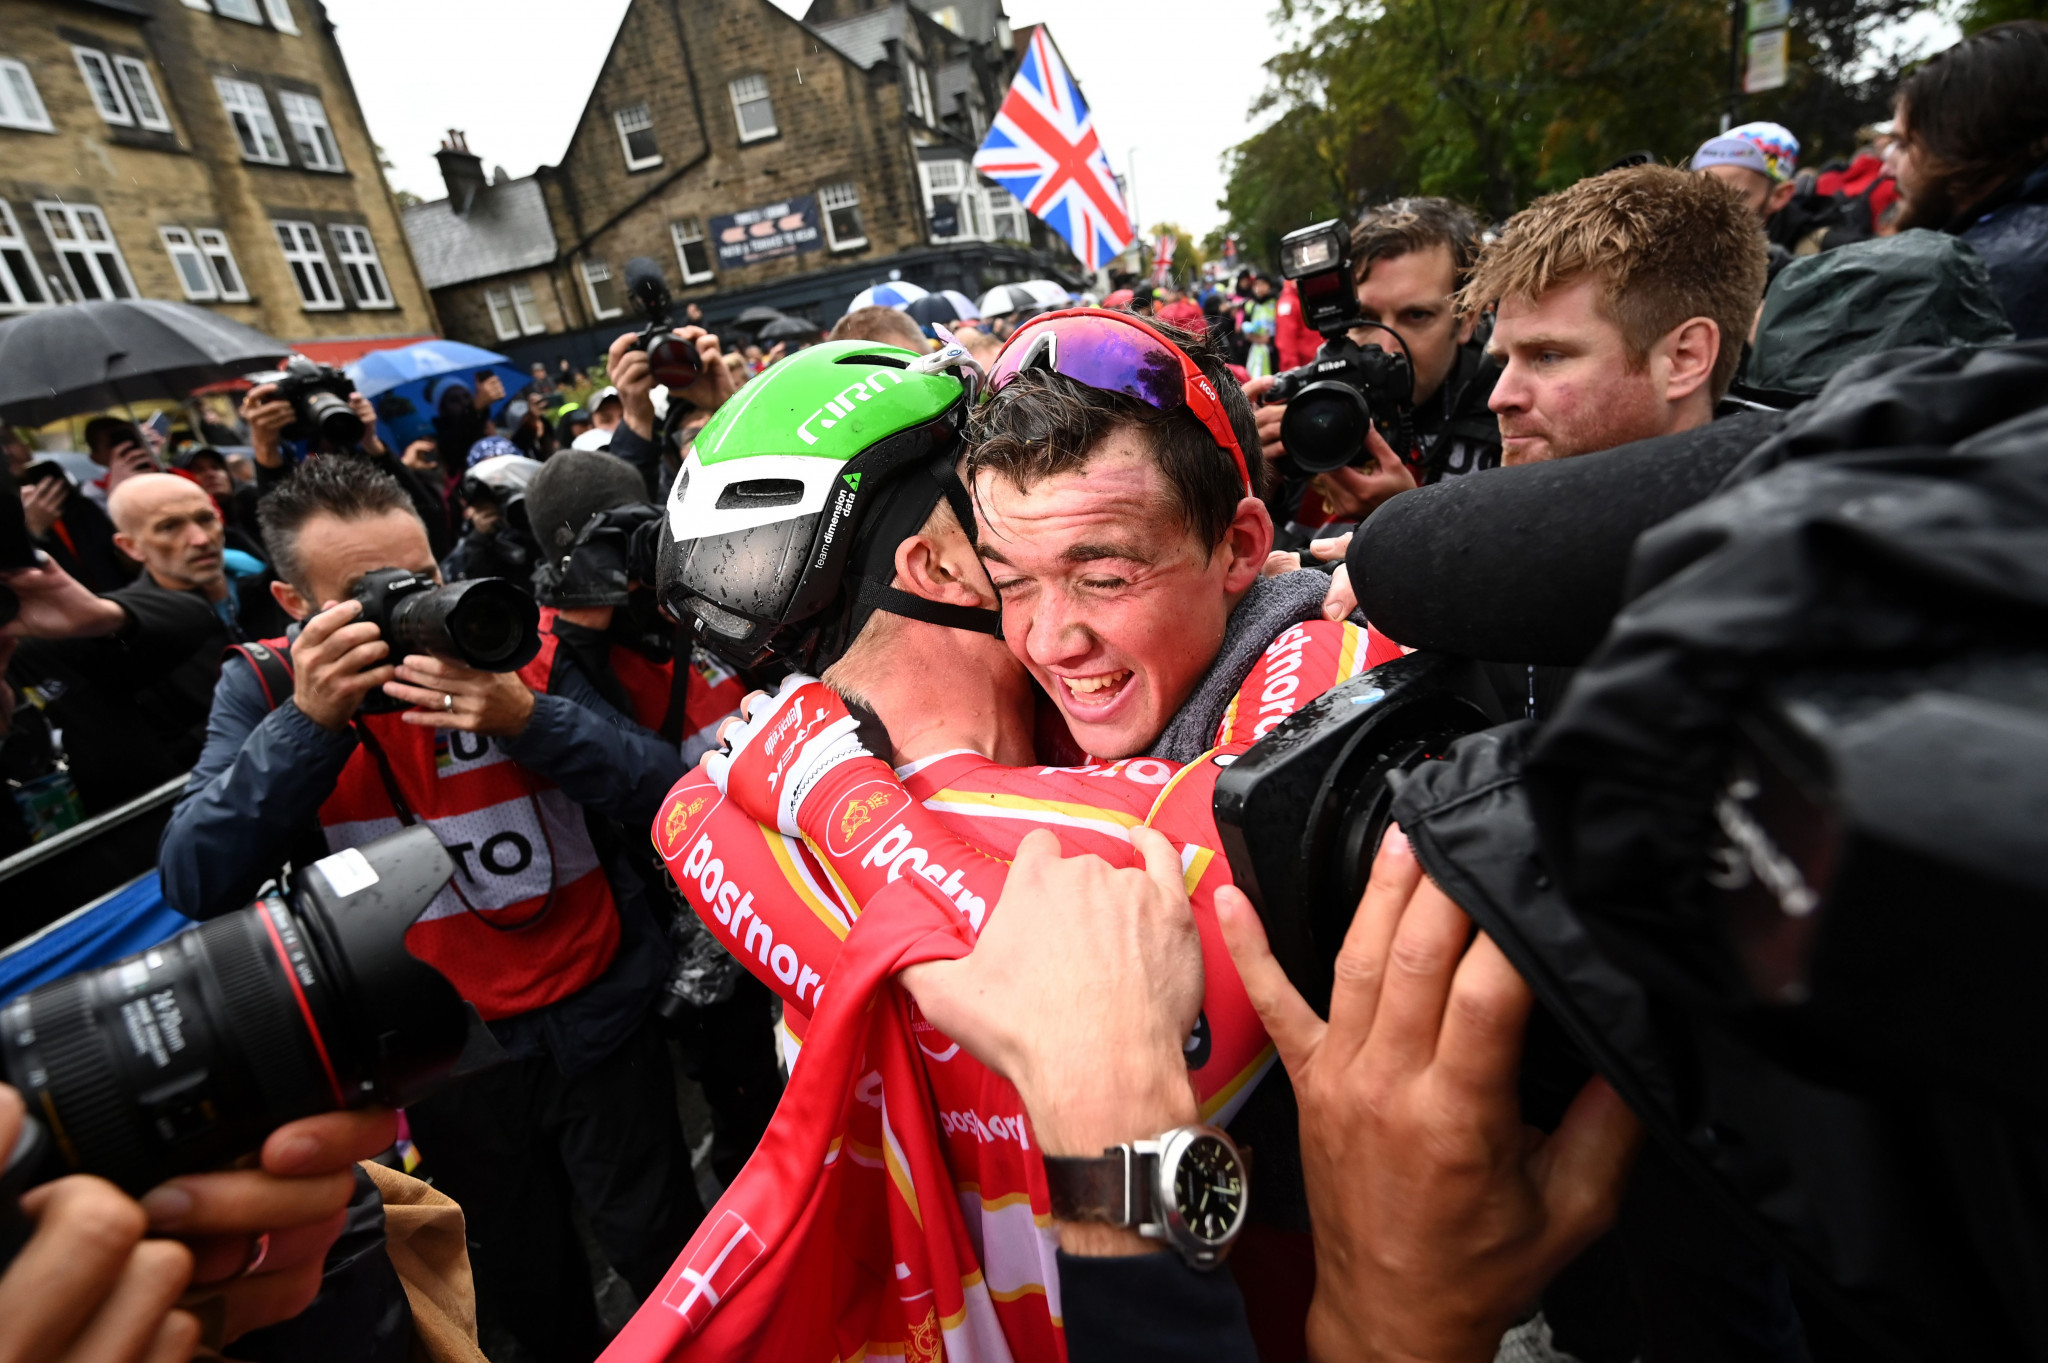 Denmark's Mads Pedersen after his win at the 2019 UCI Road World Championships ©Getty Images